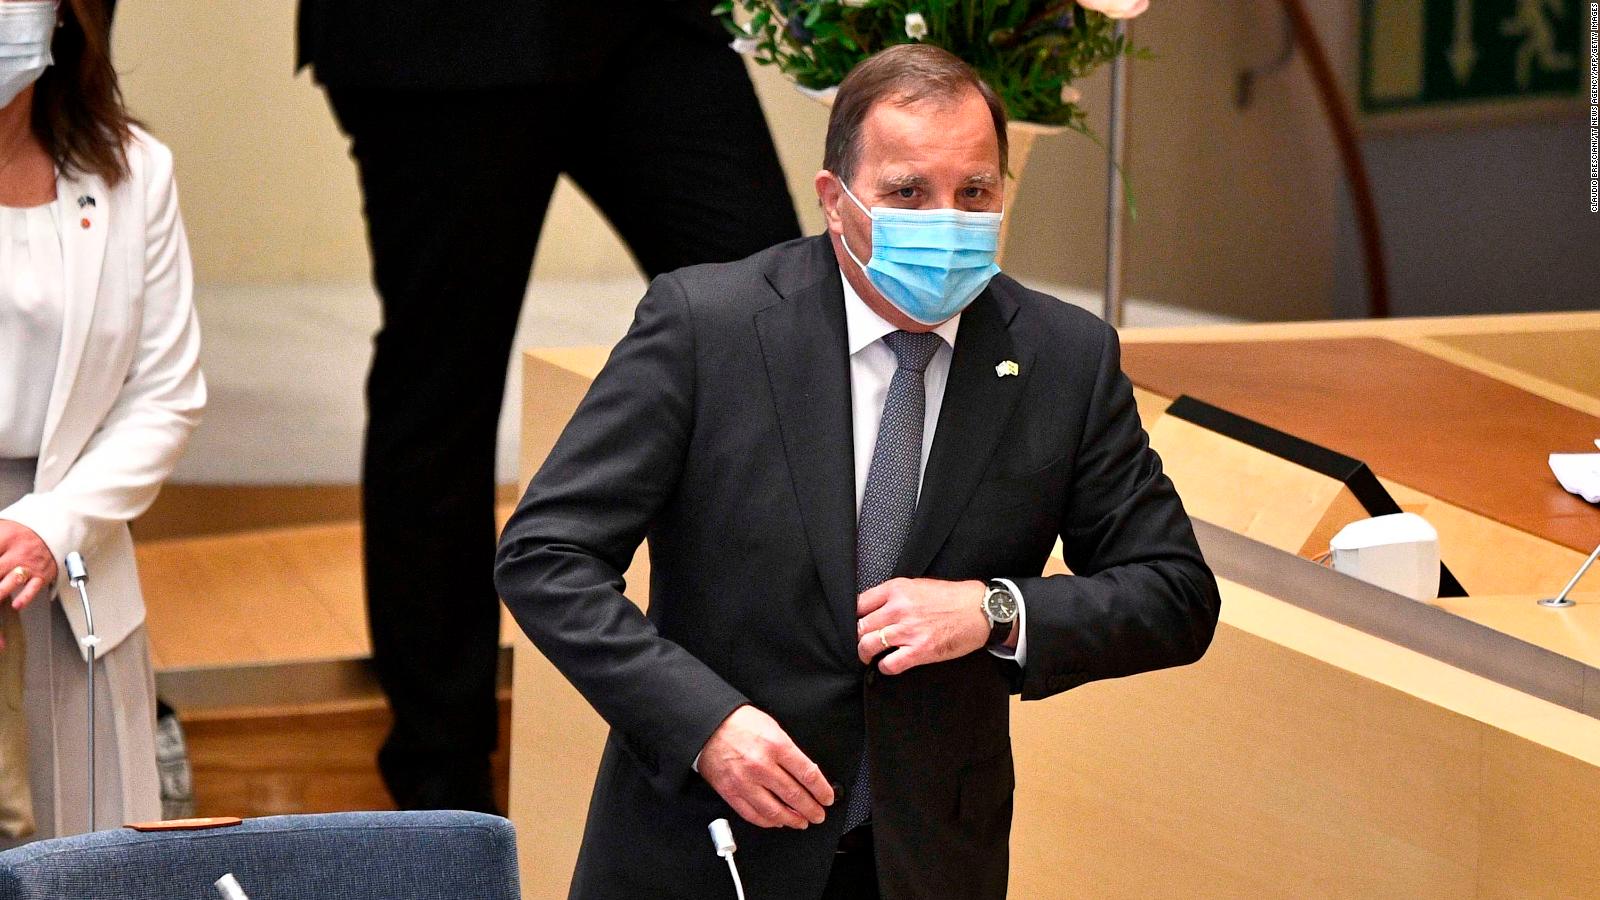 Swedish Prime Minister Stefan Lofven Ousted In Parliament No Confidence Vote Cnn 